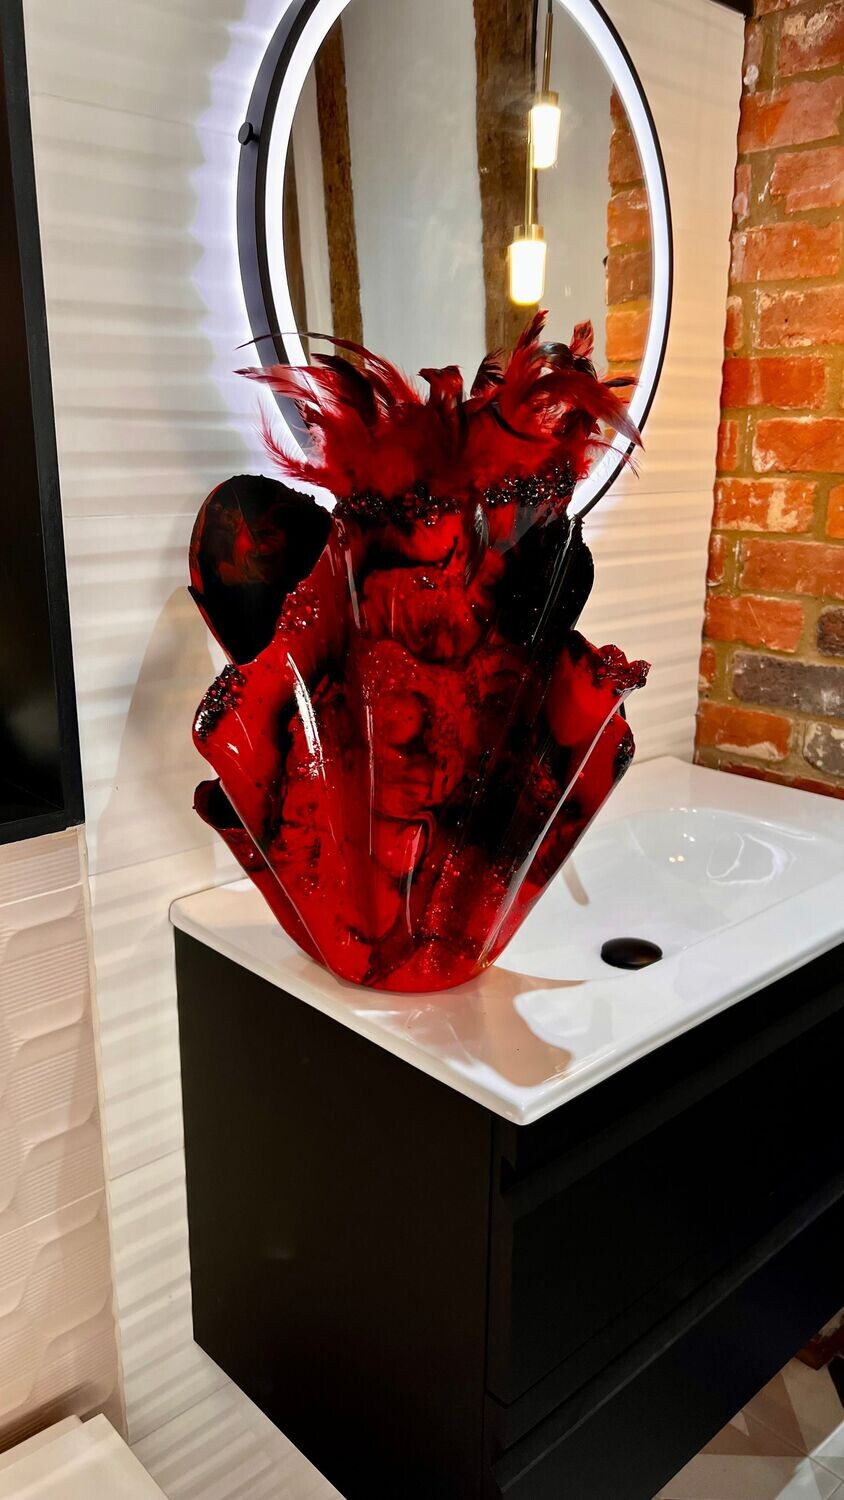 Giant Handmade Black, Red, feathers and Gems tall vase/sculpture bowl